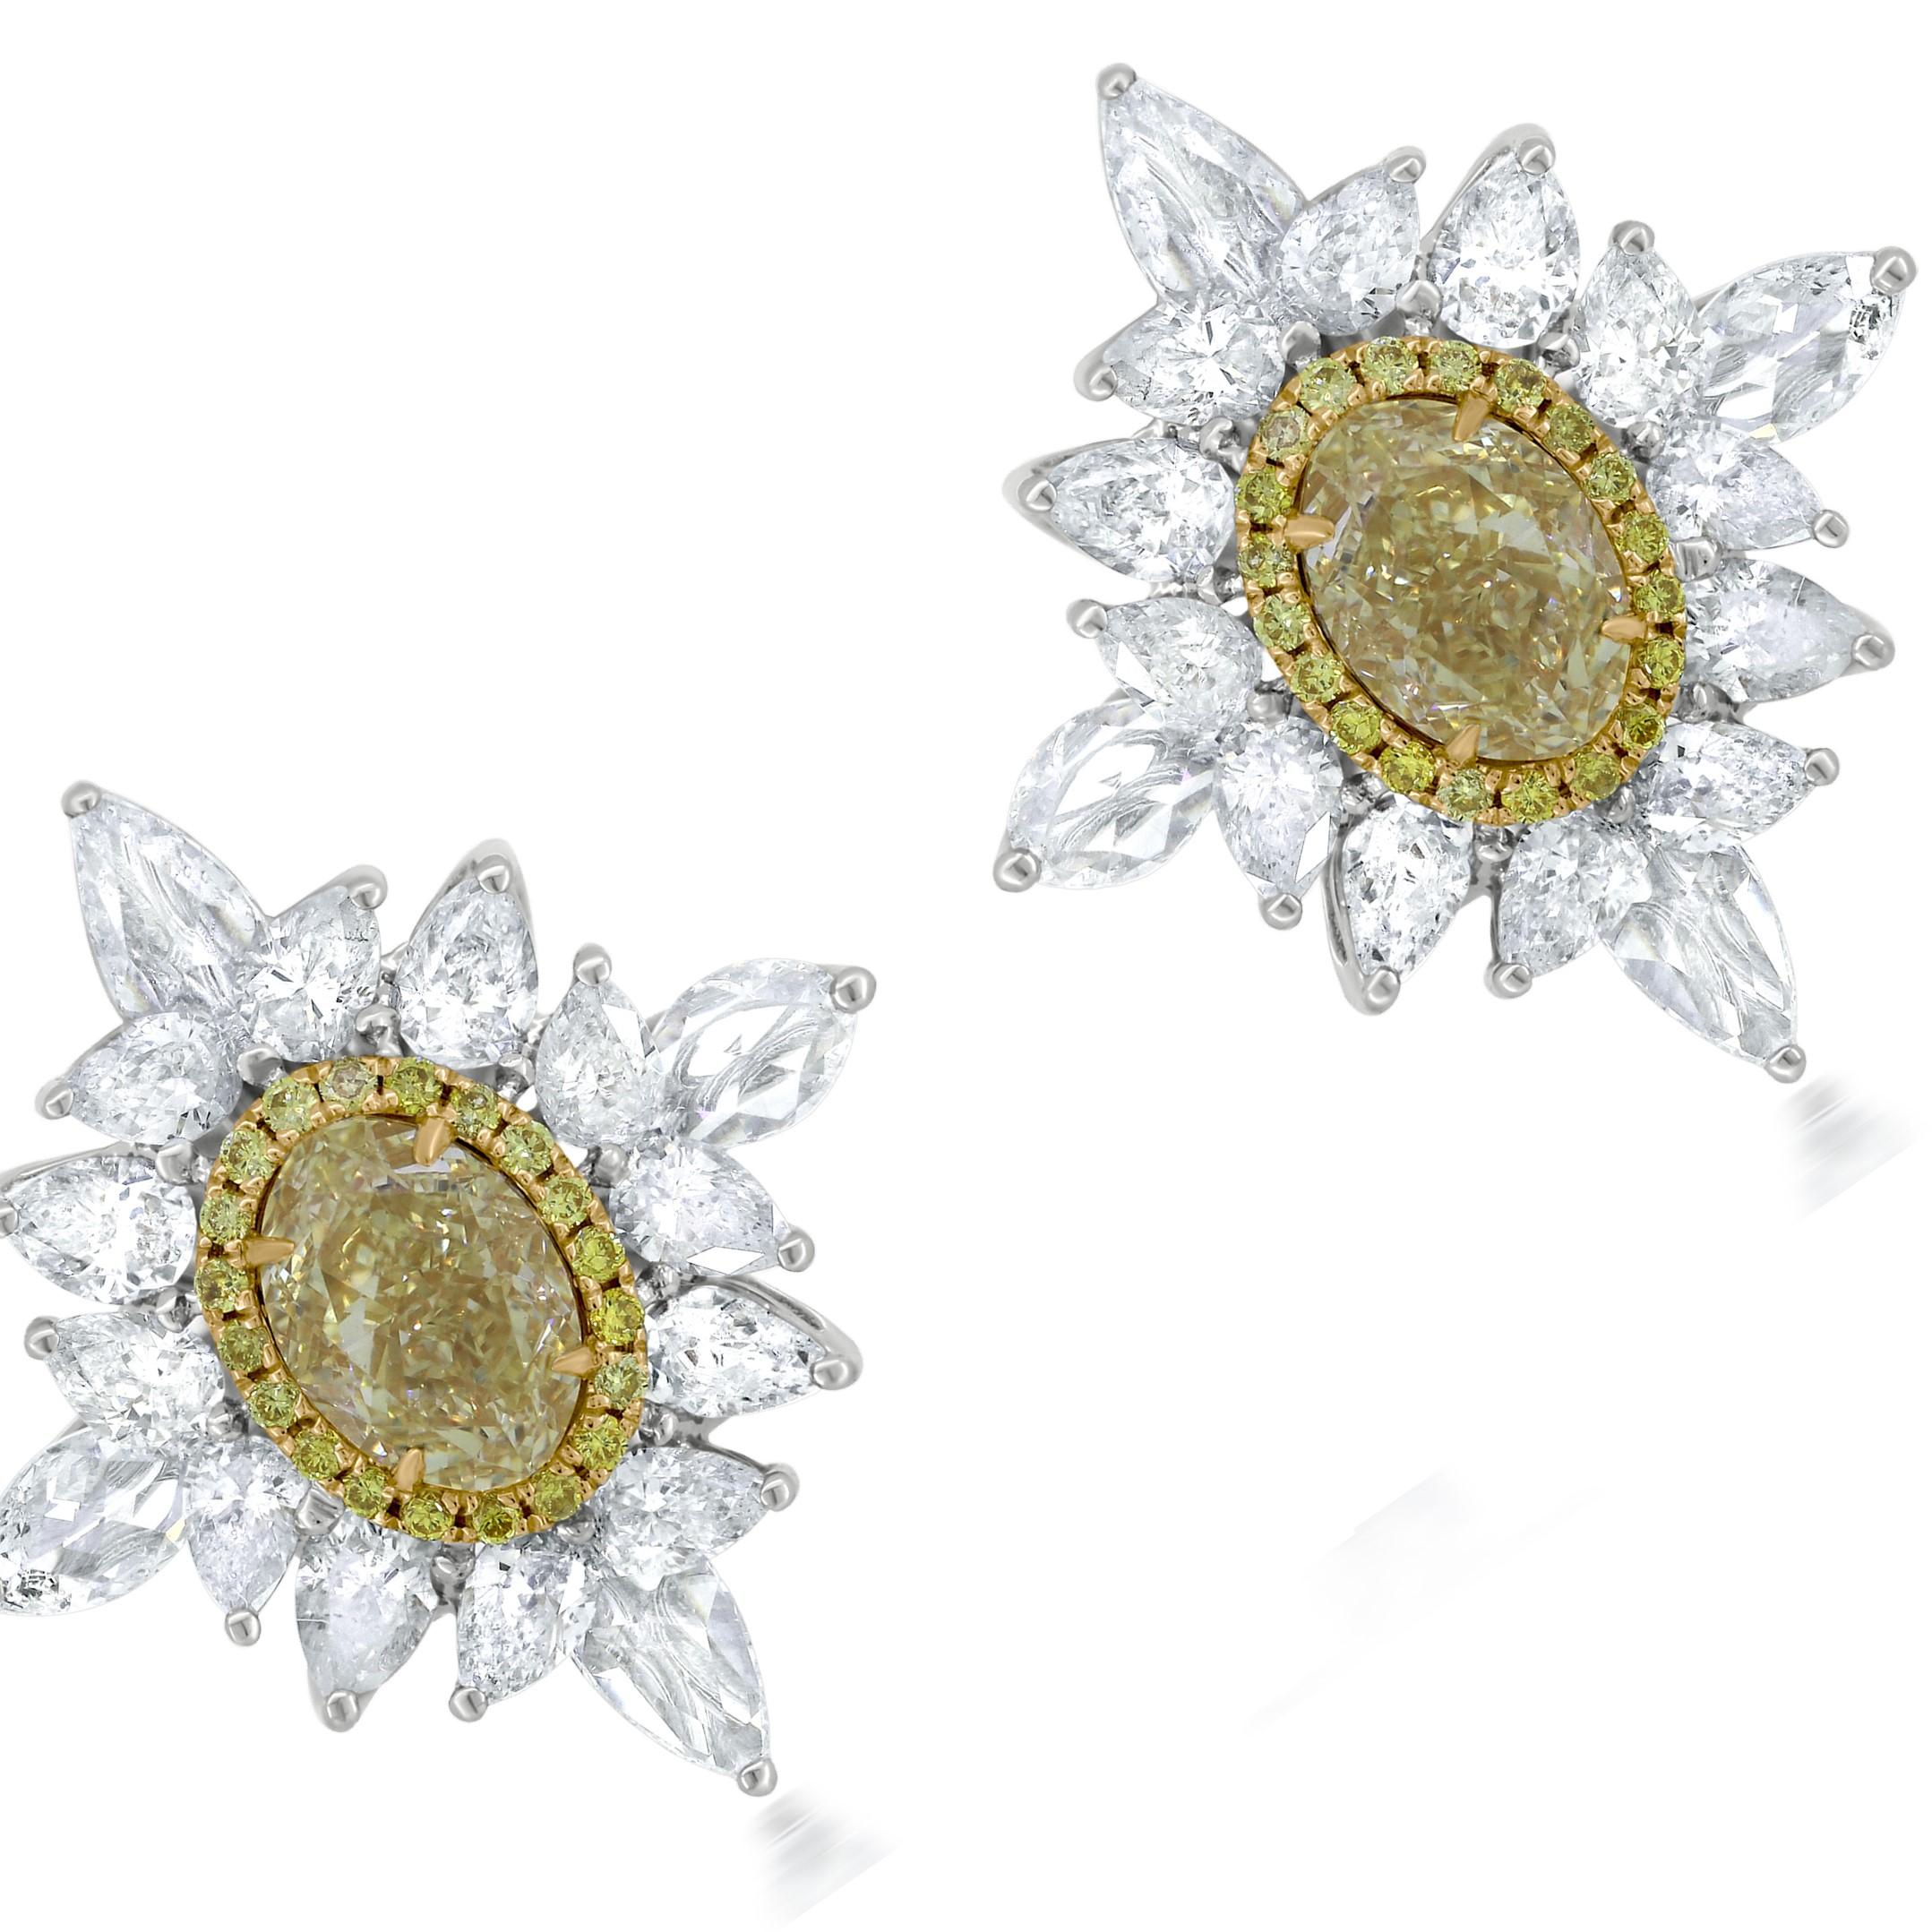 Contemporary Nigaam 3.18 Carat T.W. Diamond Flower Stud Earrings in 18k White and Yellow Gold